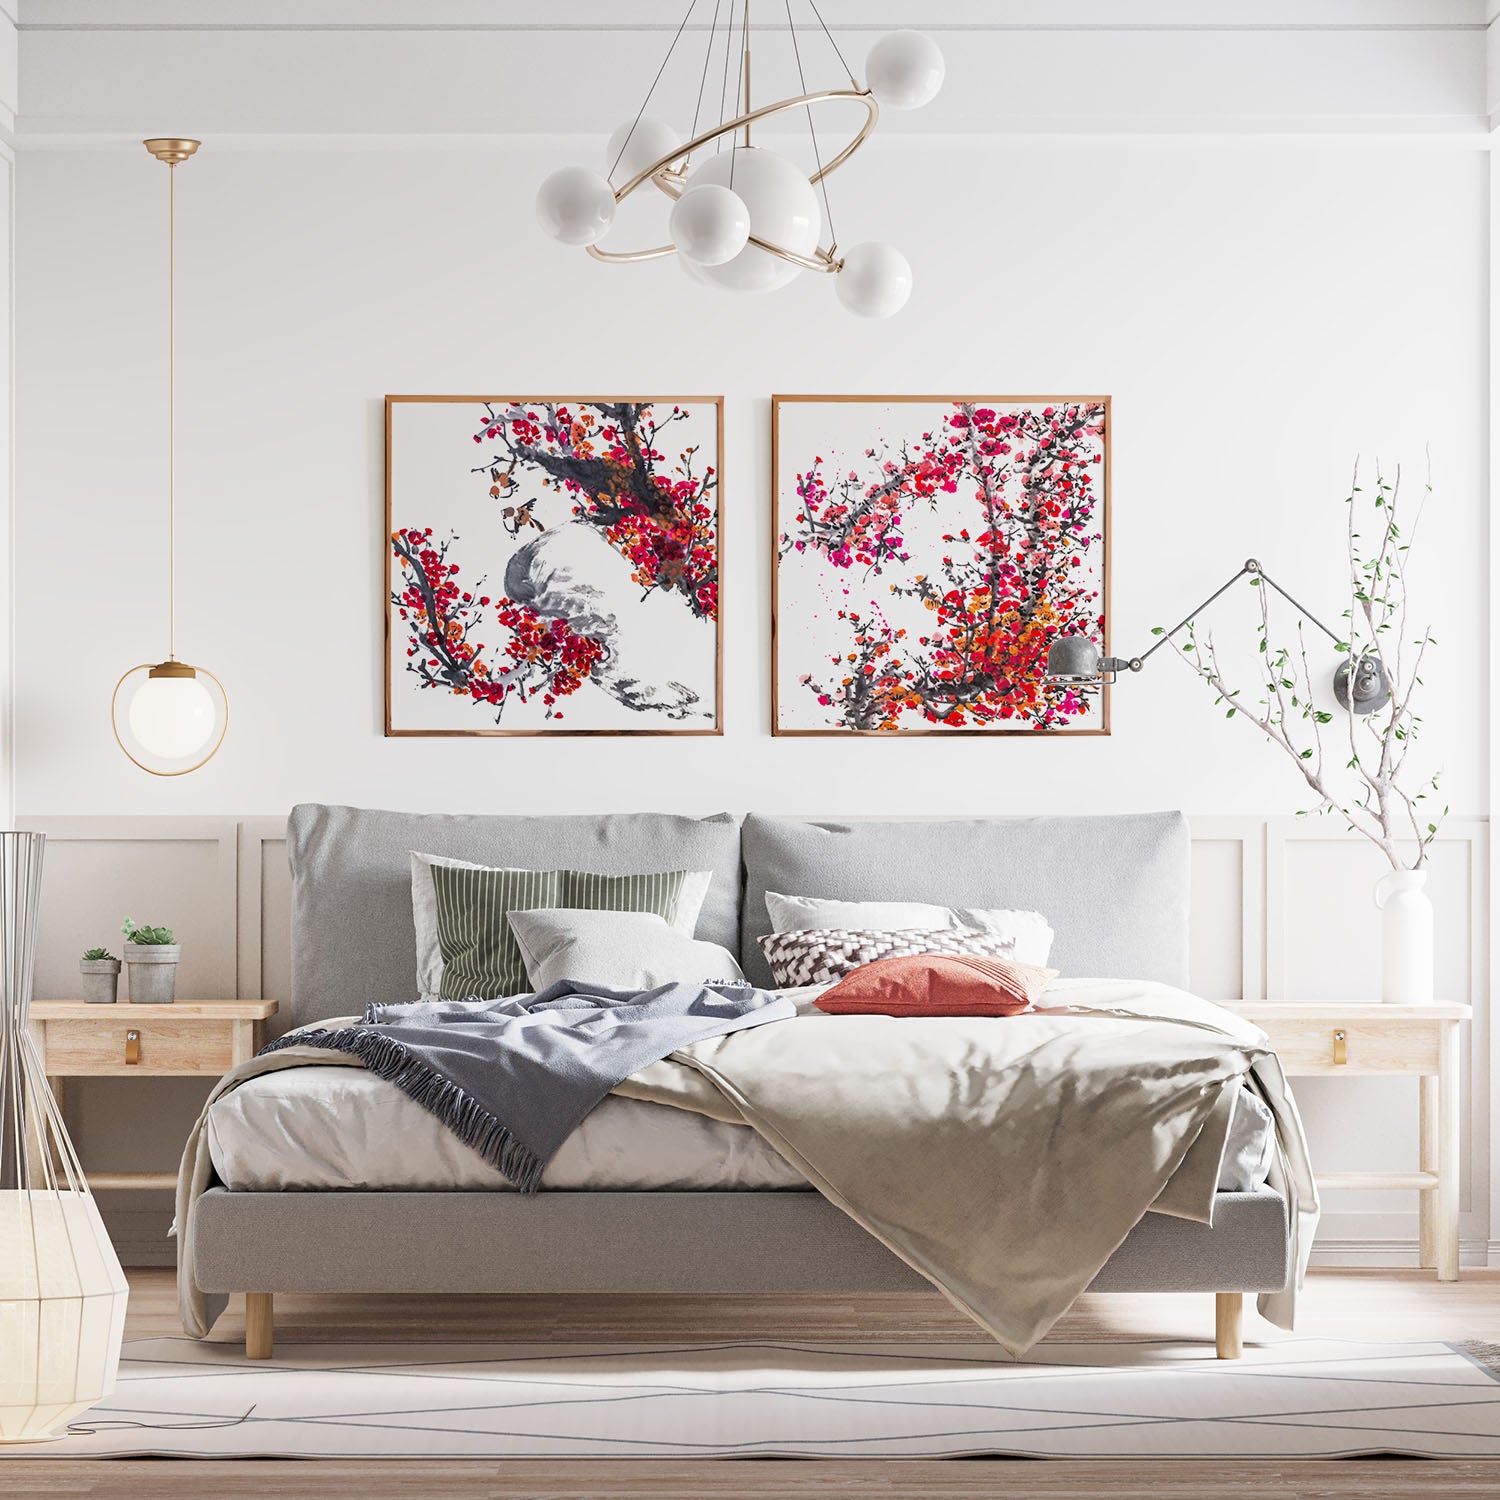 Bedroom decor with matching Japanese watercolor art prints